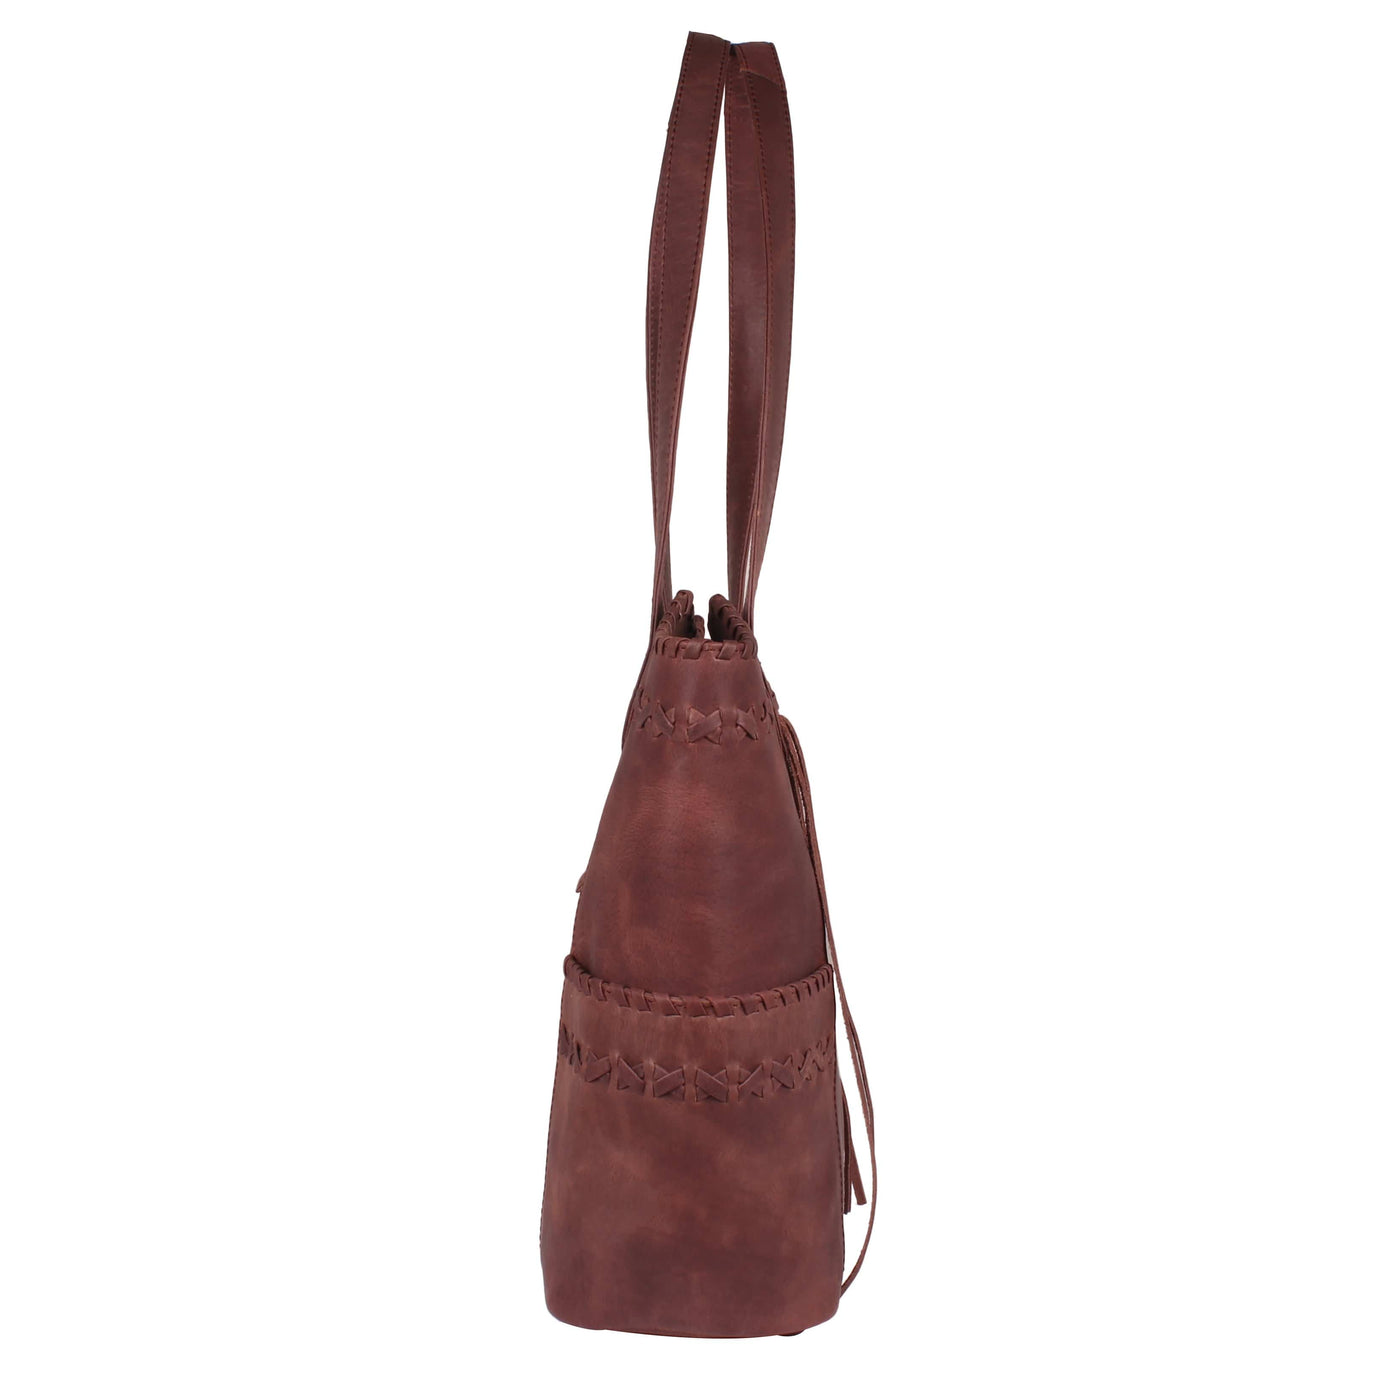 Lady Conceal Concealed Carry Purse Cognac Concealed Carry Kendall Leather Stitched Tote by Lady Conceal Brown